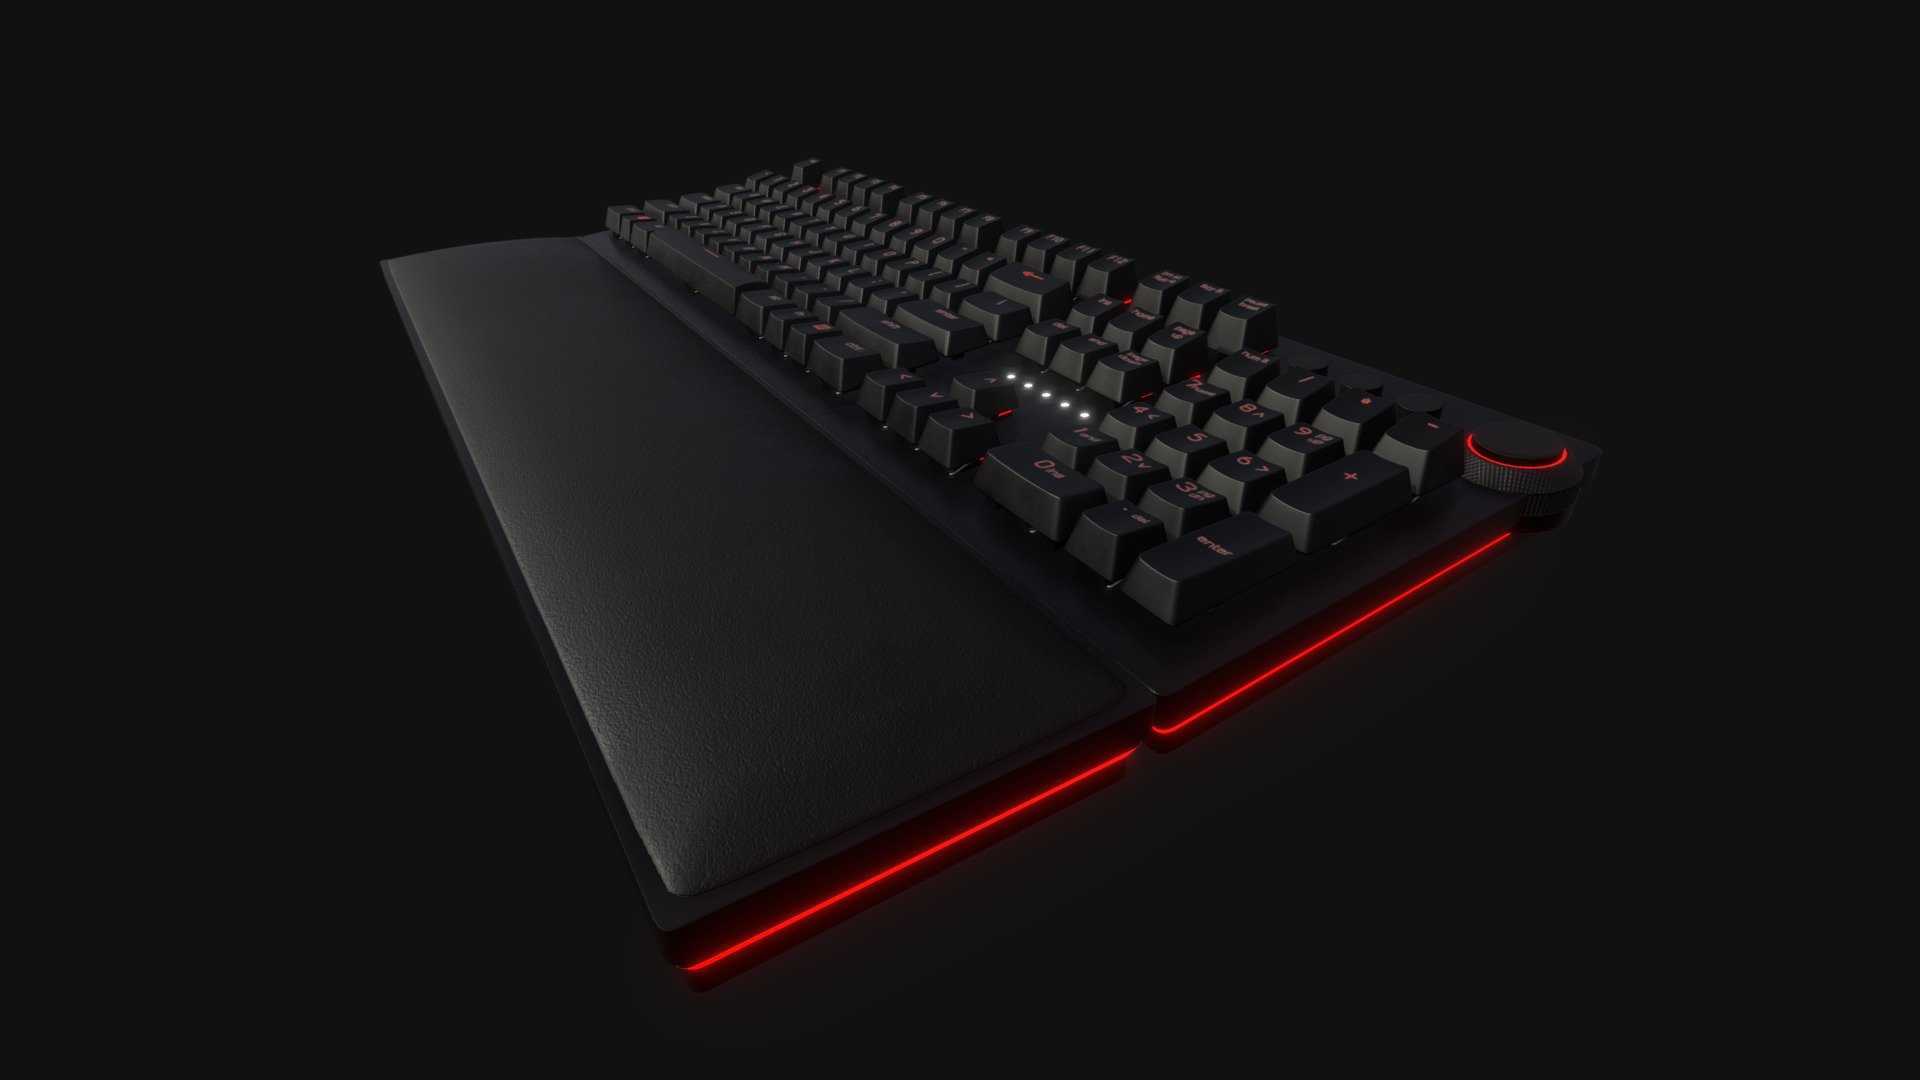 This is a model of a RGB mechanical keyboard. I will be updating the model throughout this month. The specific model of keyboard is the Razer Huntsman Elite - RGB Gaming Keyboard - 3D model by Tyler Scarlett (@ScarlettOwll) 3d model